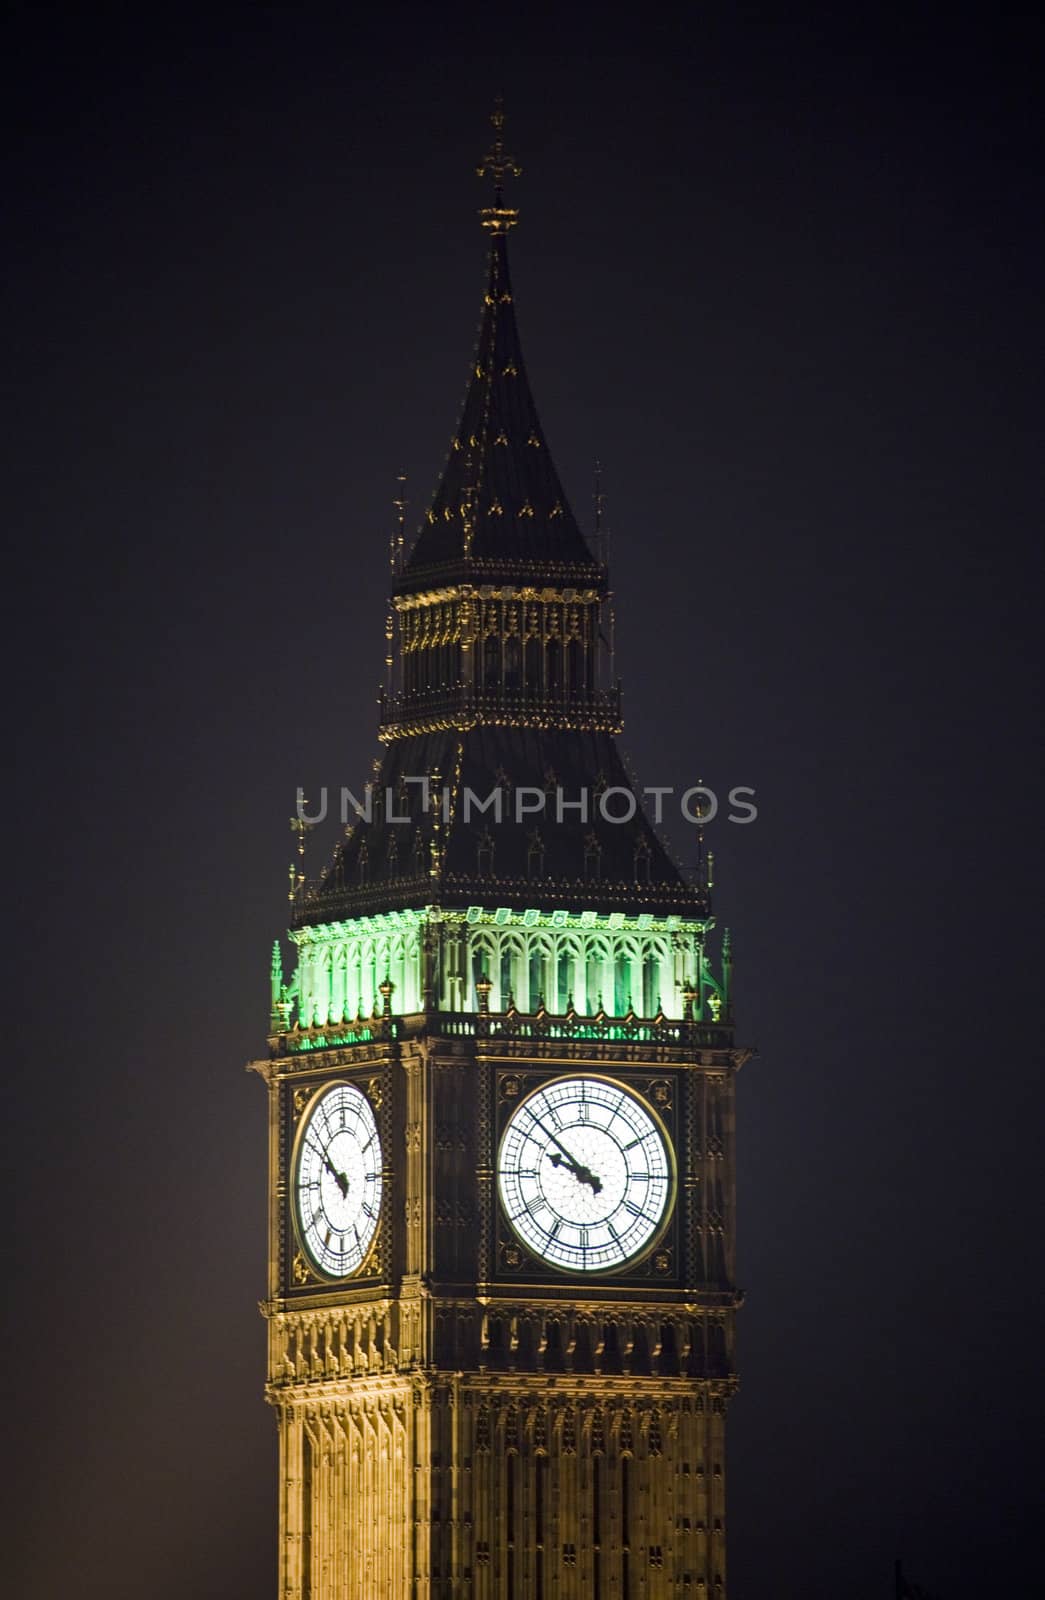 Big Ben / Houses of Parliament in London by chrisdorney